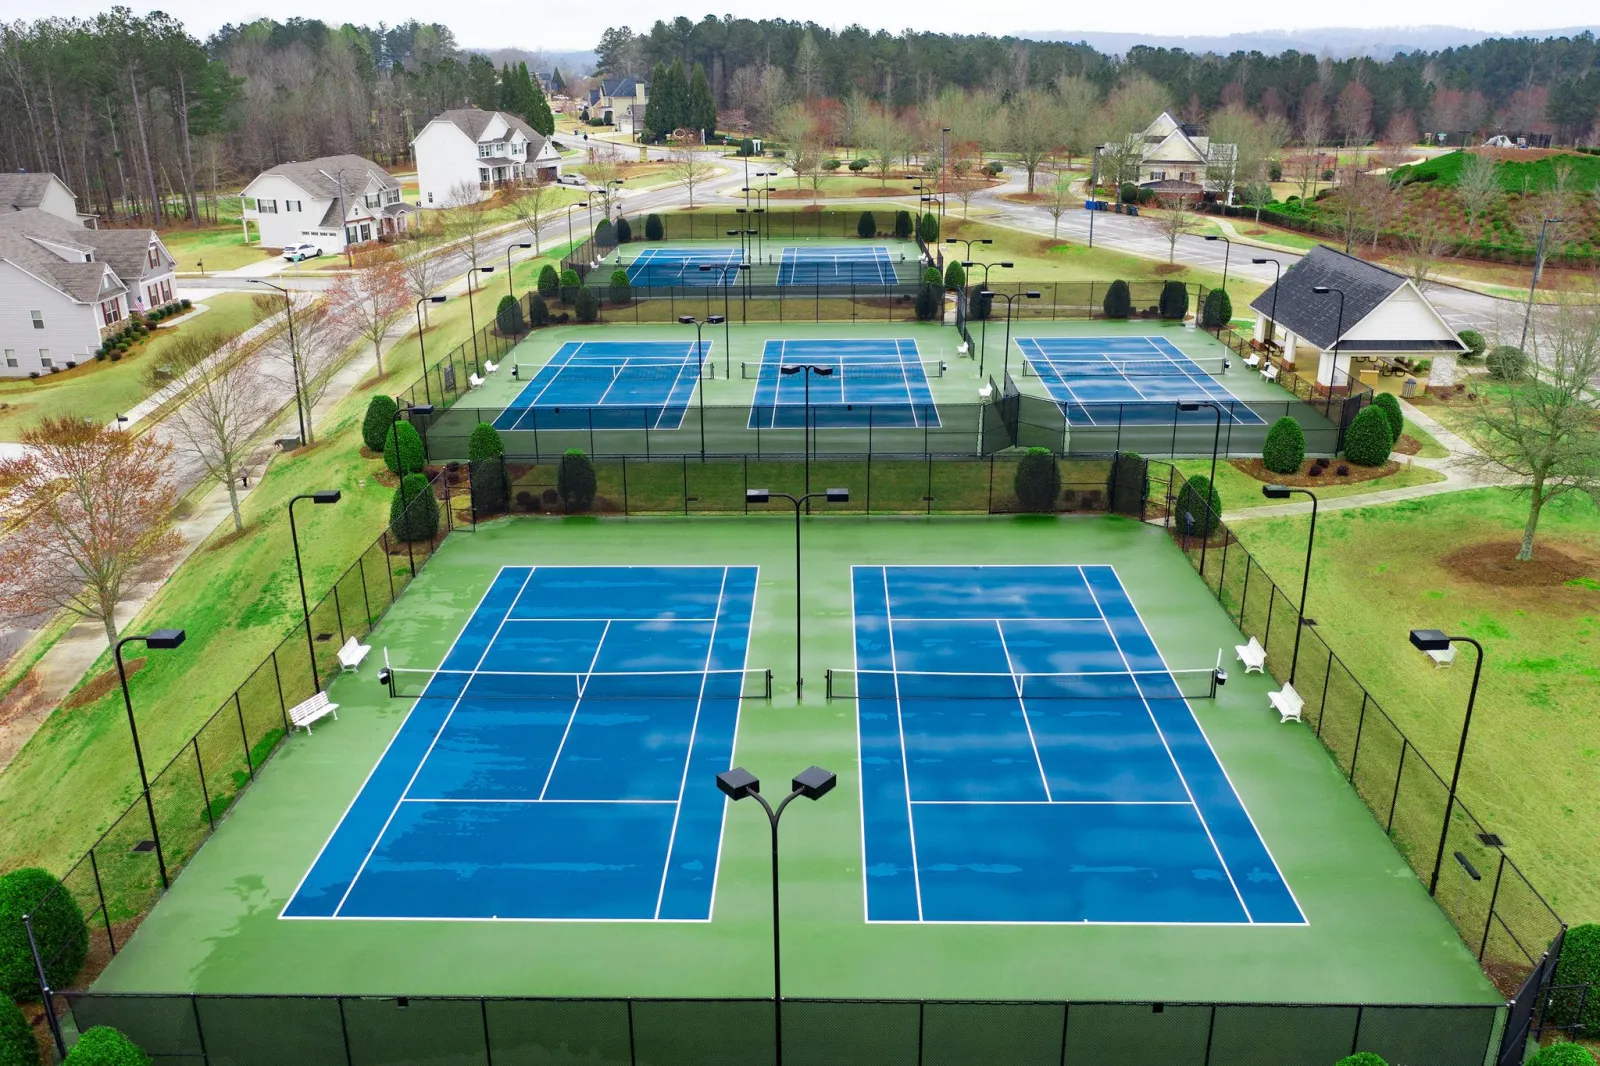 the many tennis courts with lights and plenty of space